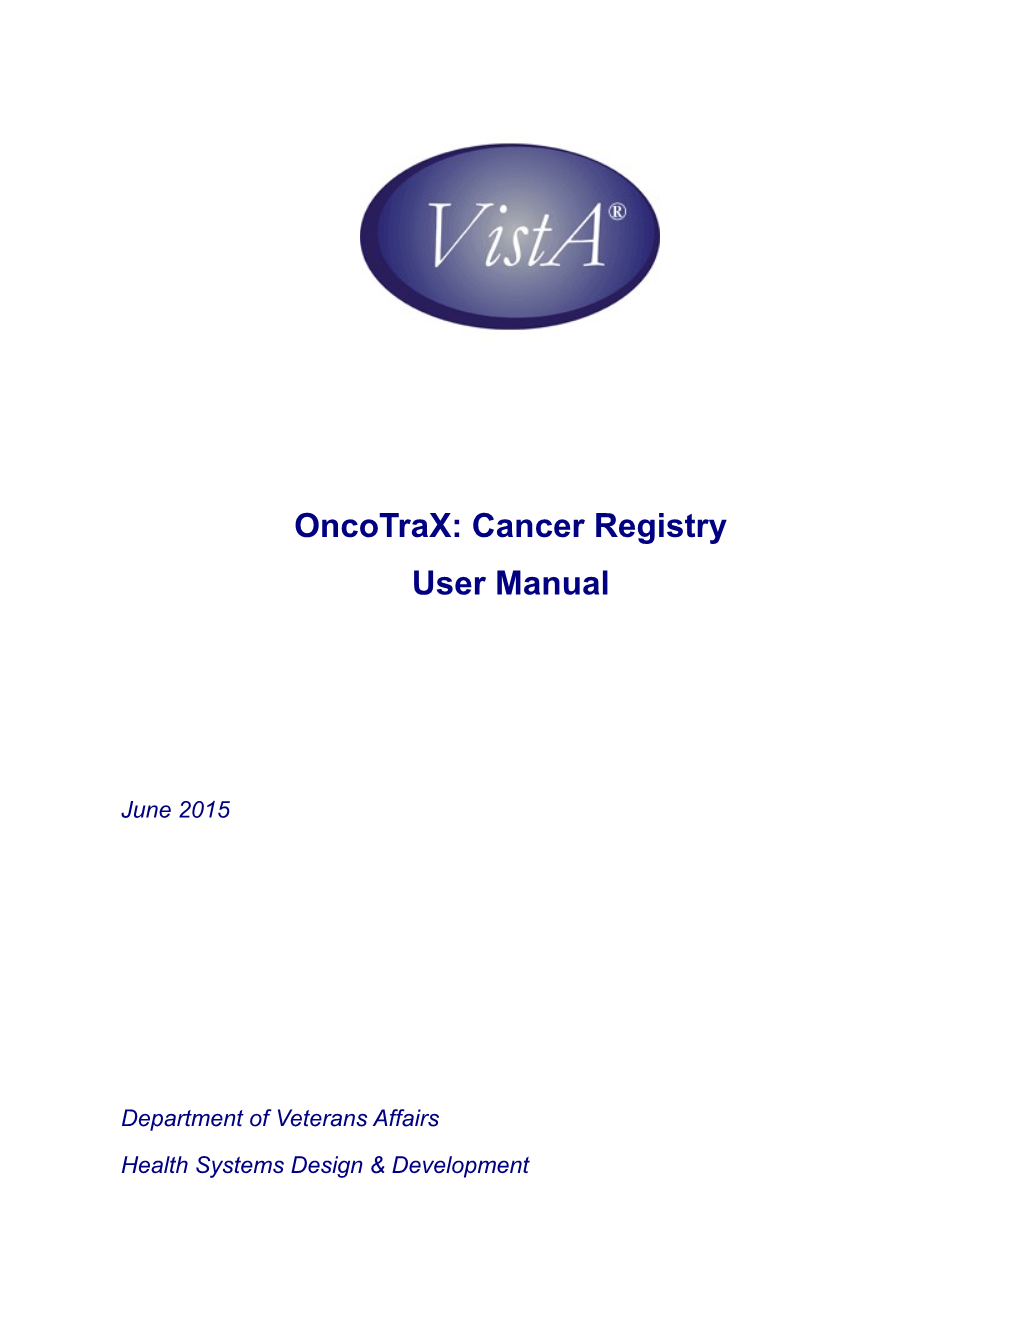 Oncotrax: Cancer Registry